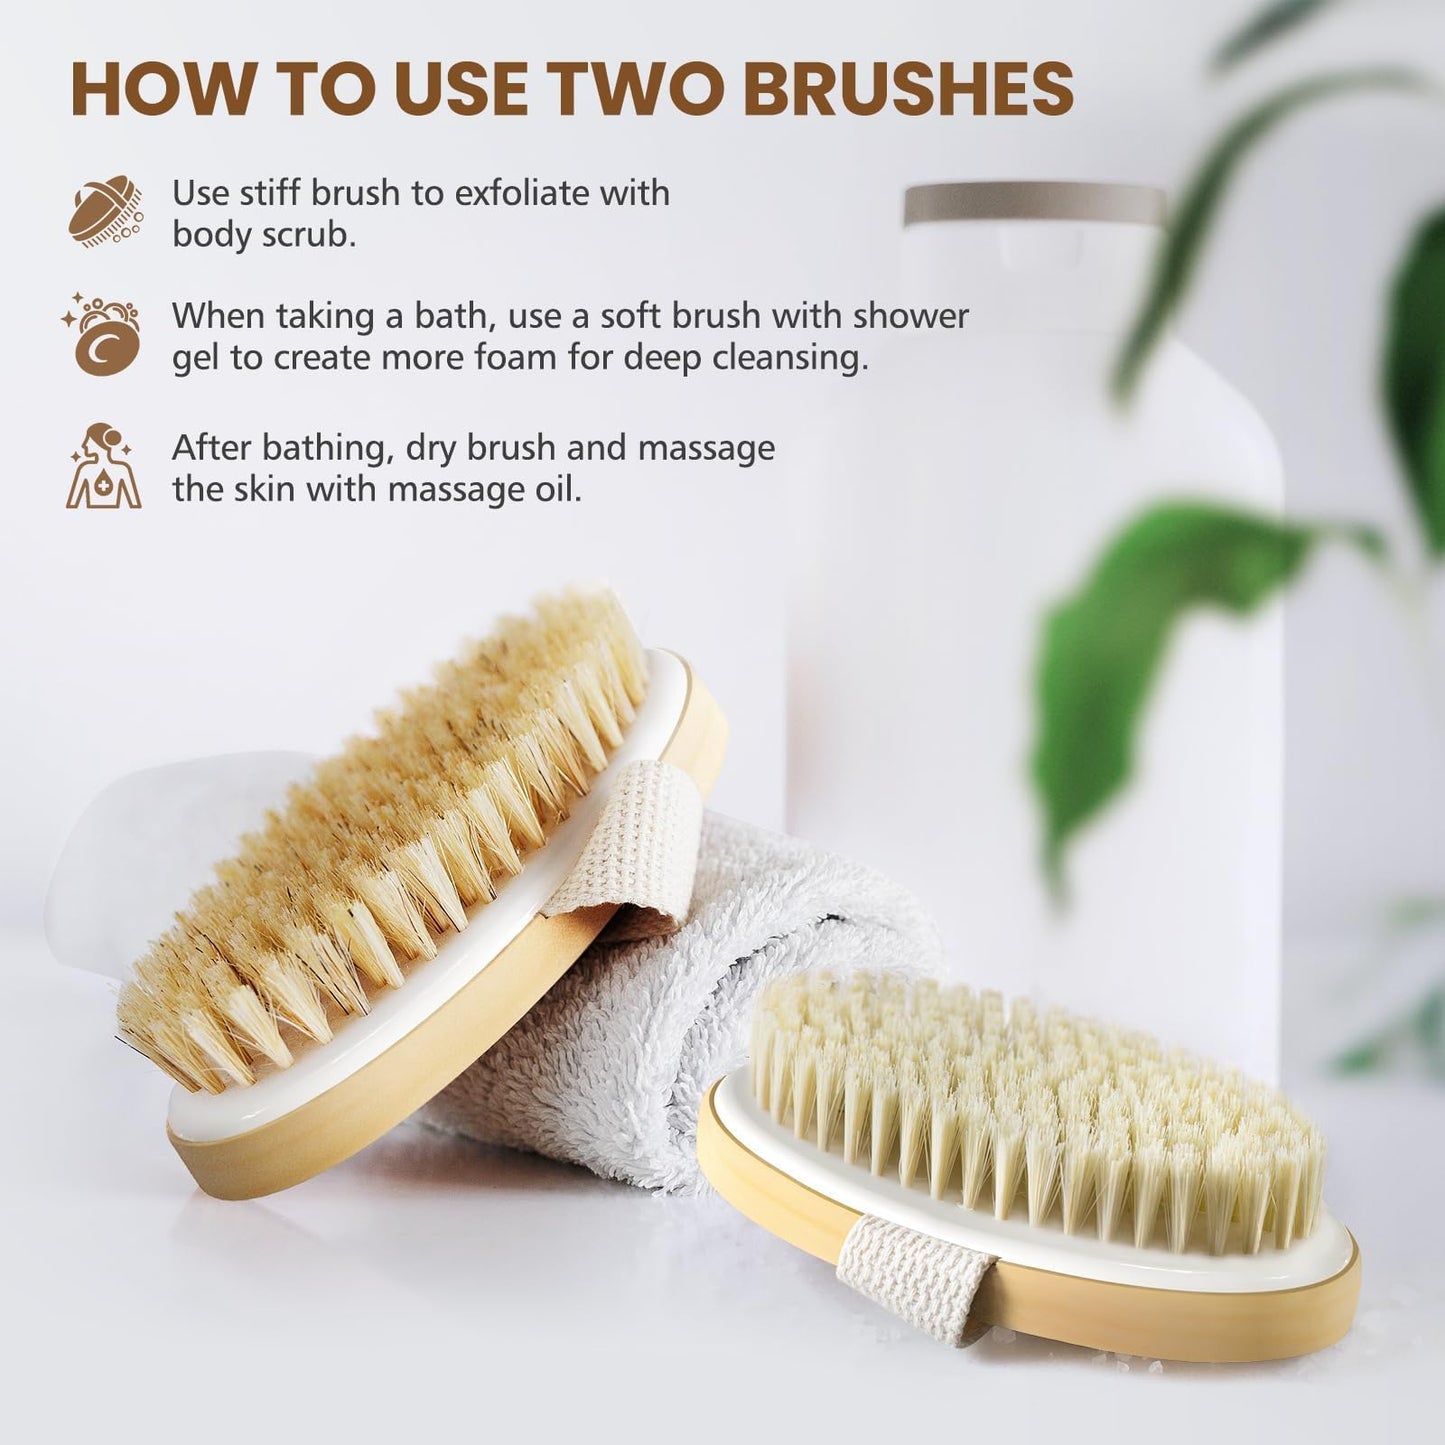 POPCHOSE Dry Brushing Body Brush, Natural Bristle Dry Skin Exfoliating Brush Body Scrub for Flawless Skin, Cellulite Treatment, Lymphatic Drainage and Blood Circulation Improvement